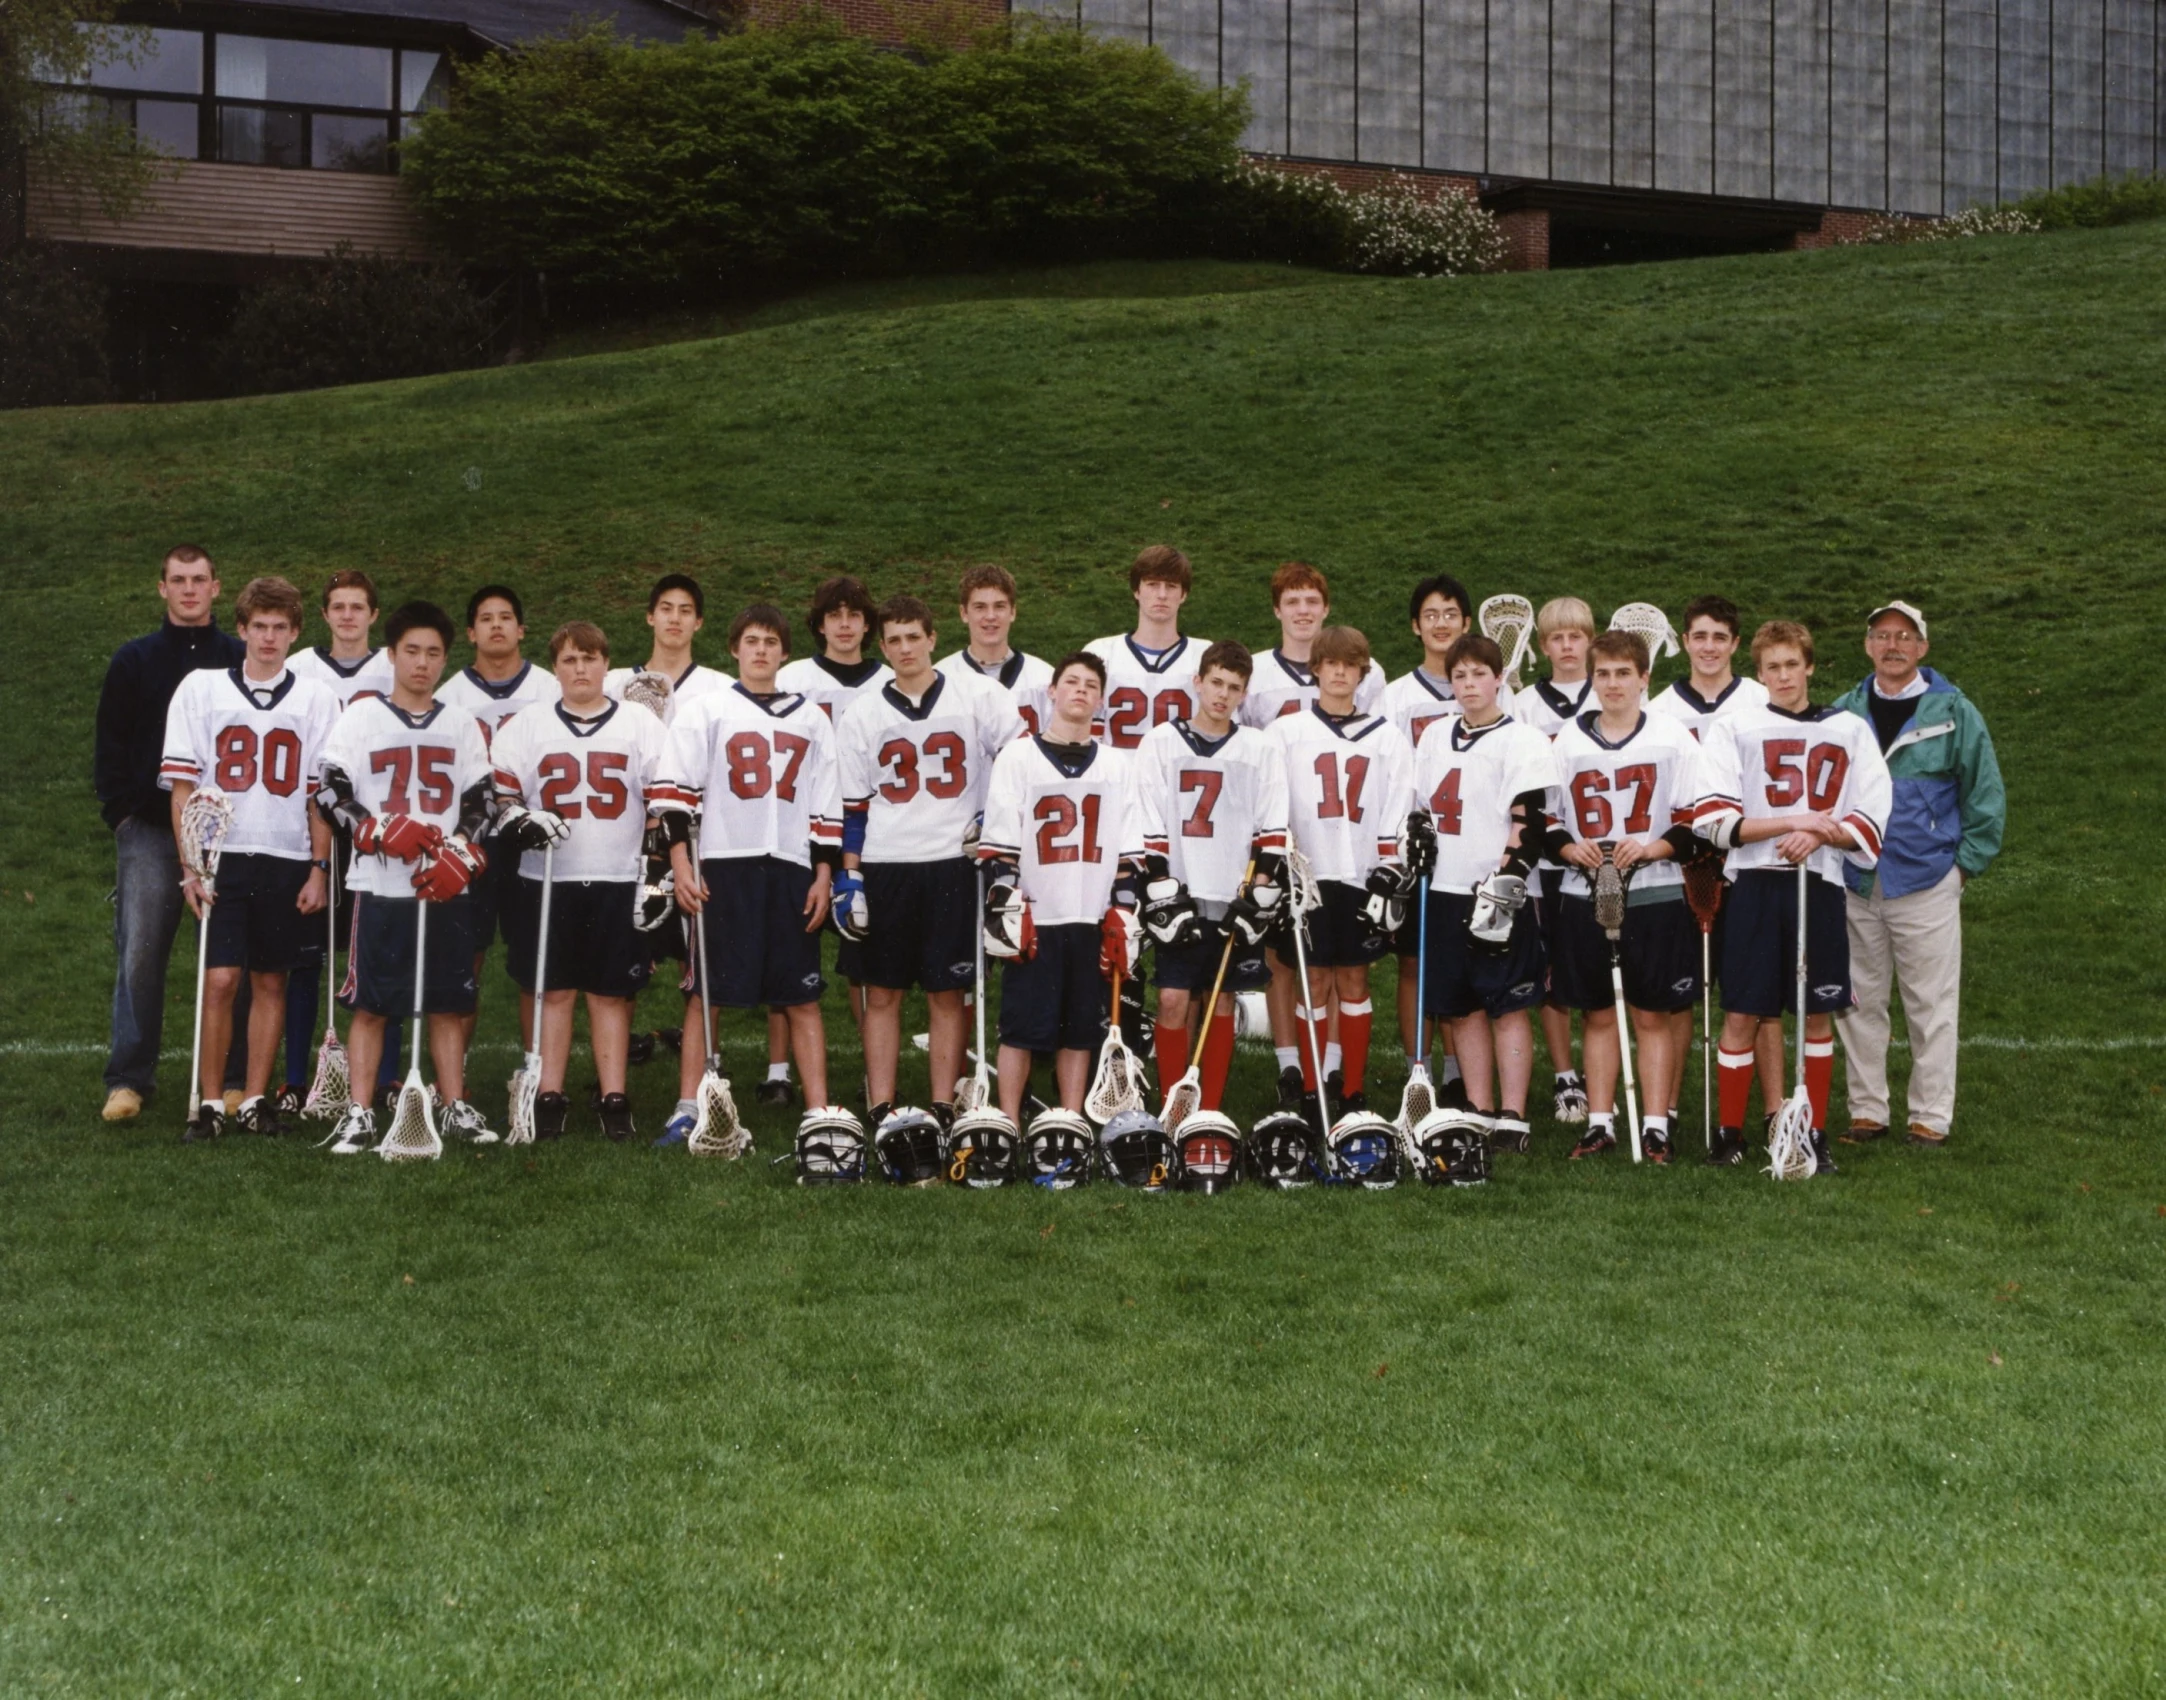 this is a po of a group of young men and woman lacrosse teams